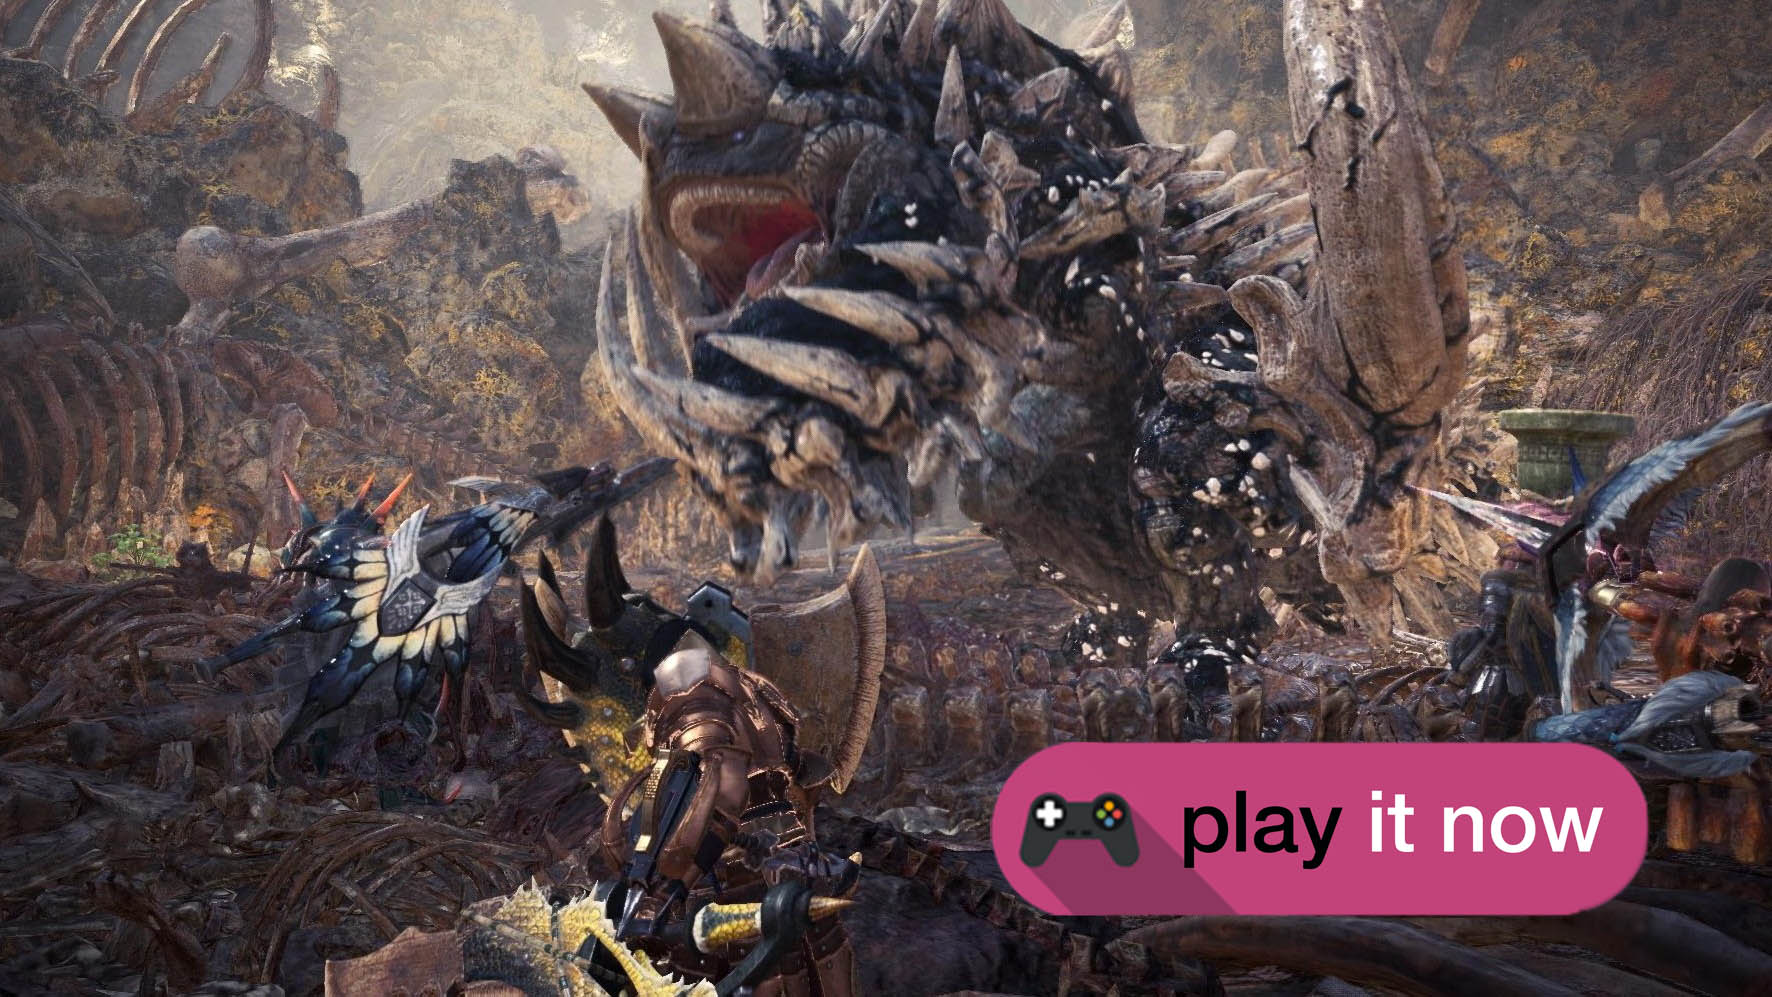 MONSTER HUNTER: WORLD Review: An Approachable Entry To A World Of